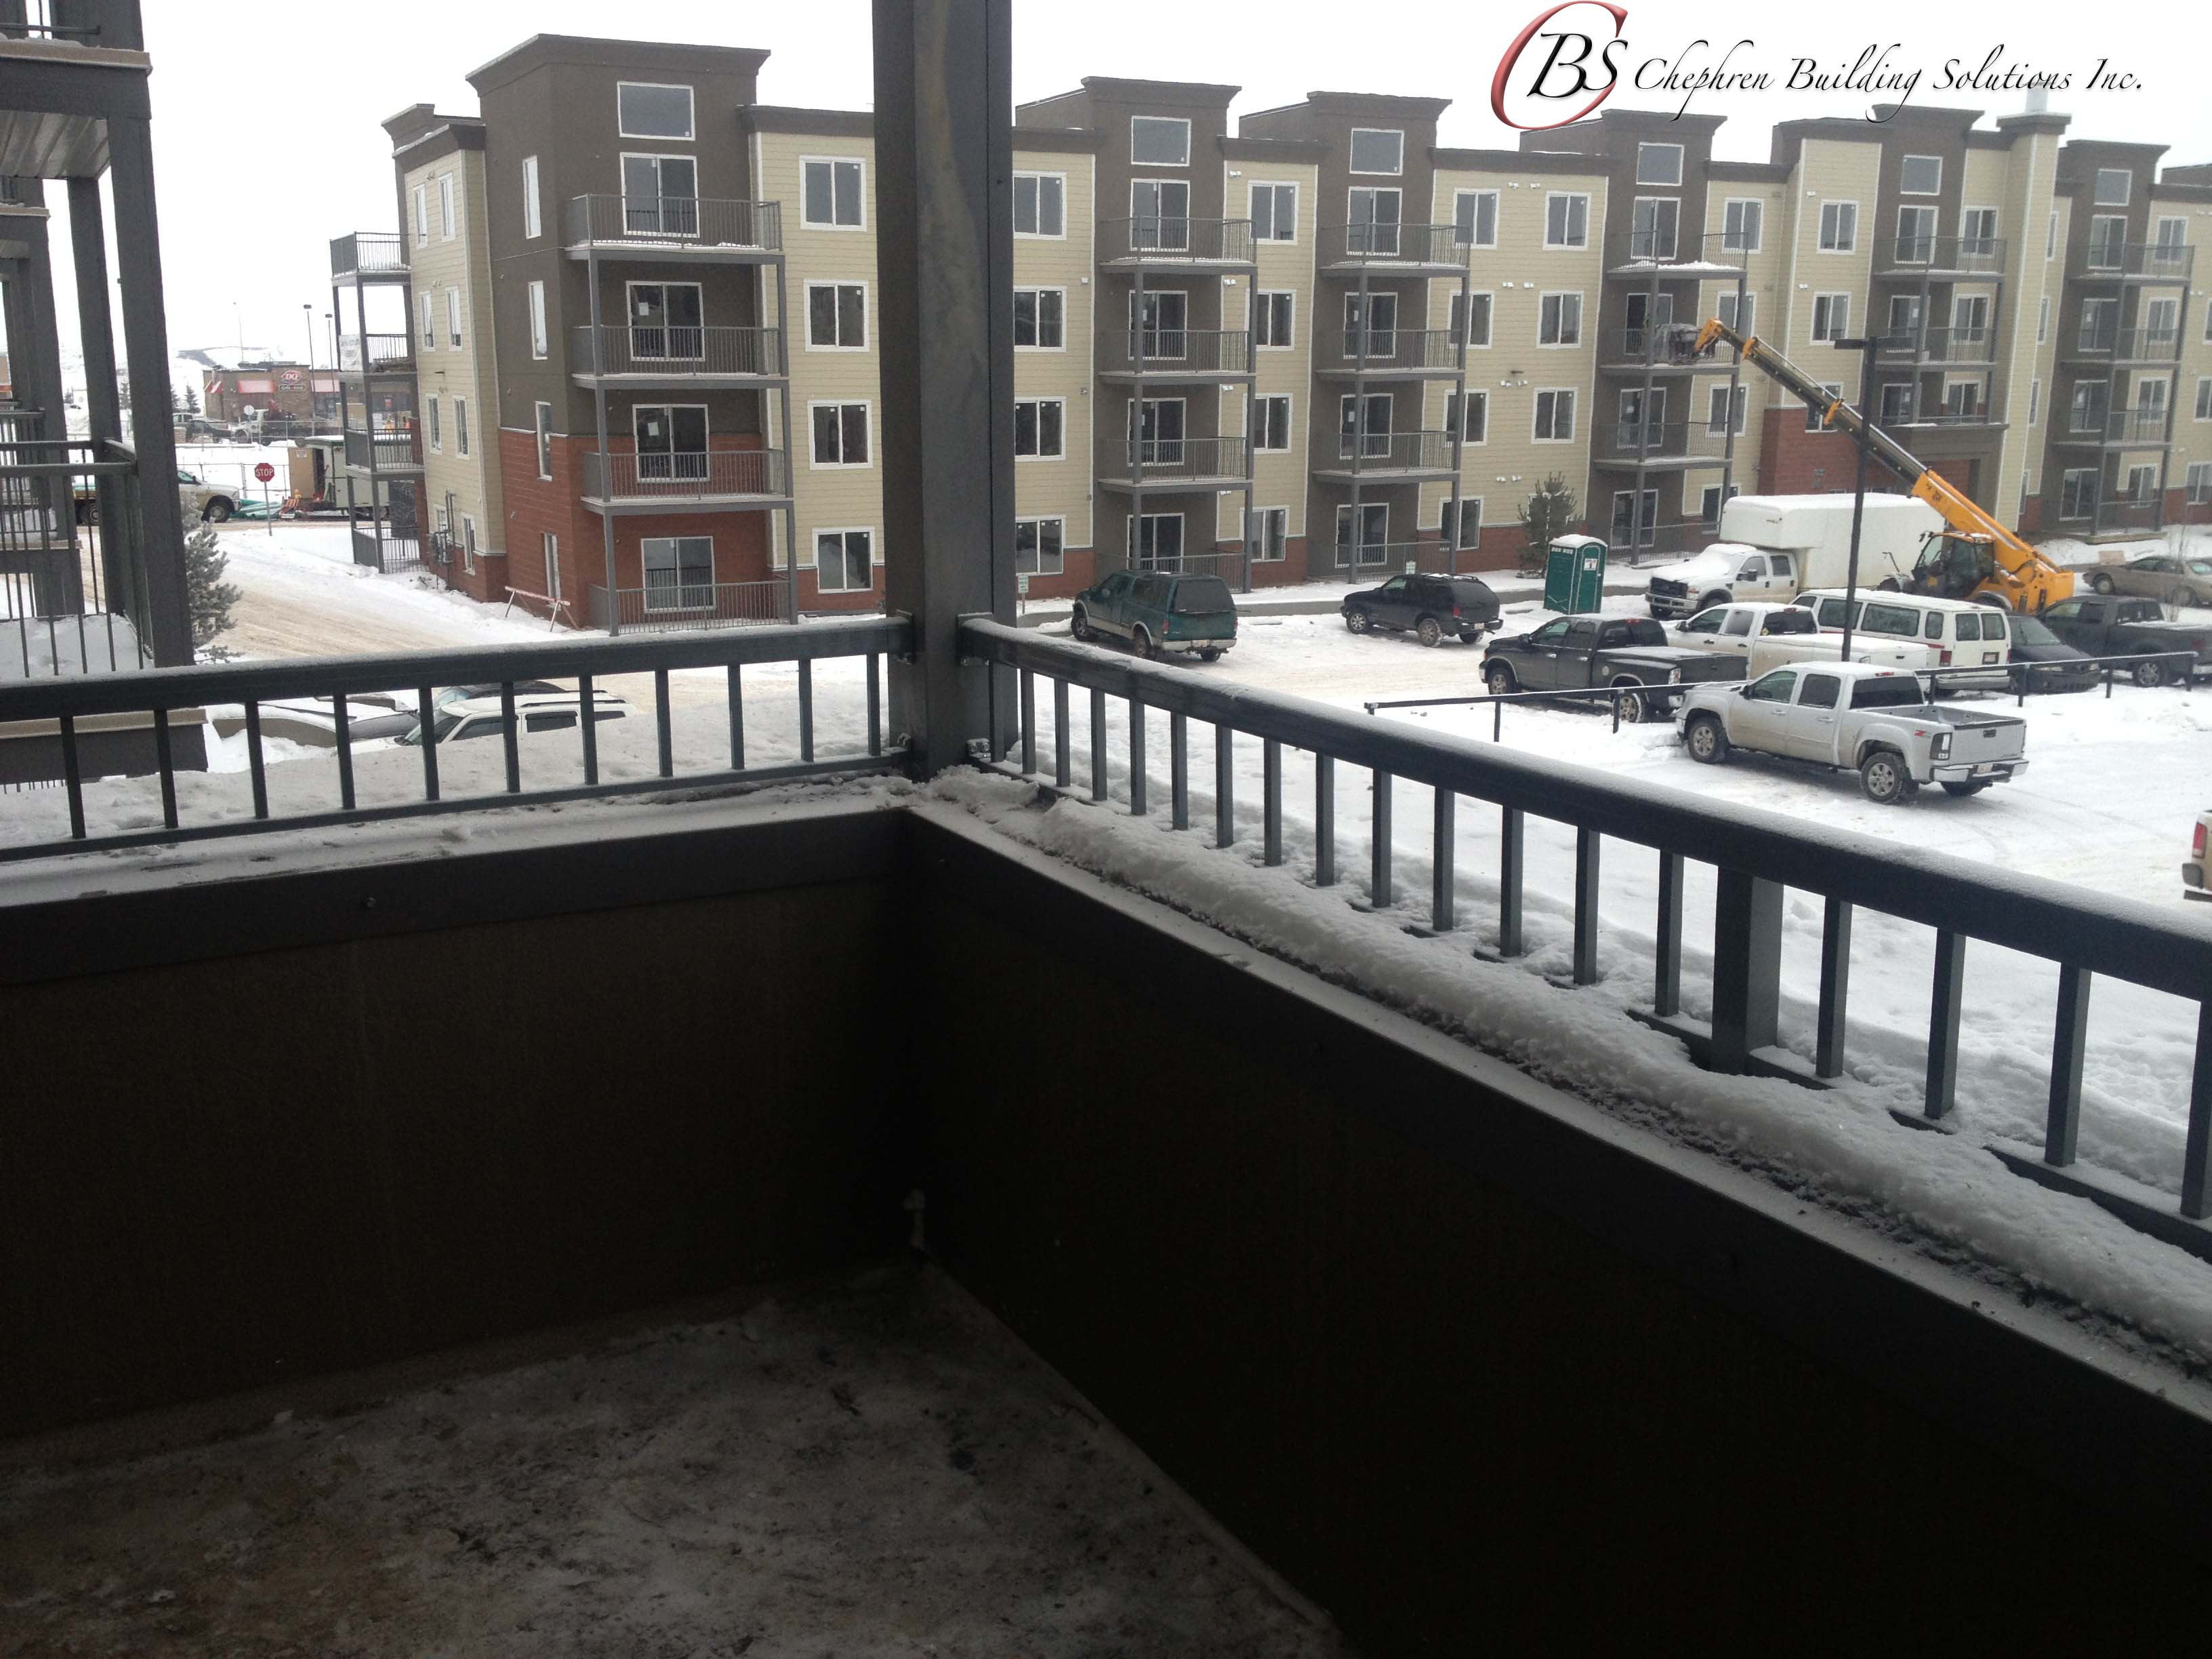 Deck, Railing, and renovation services for commercial projects.